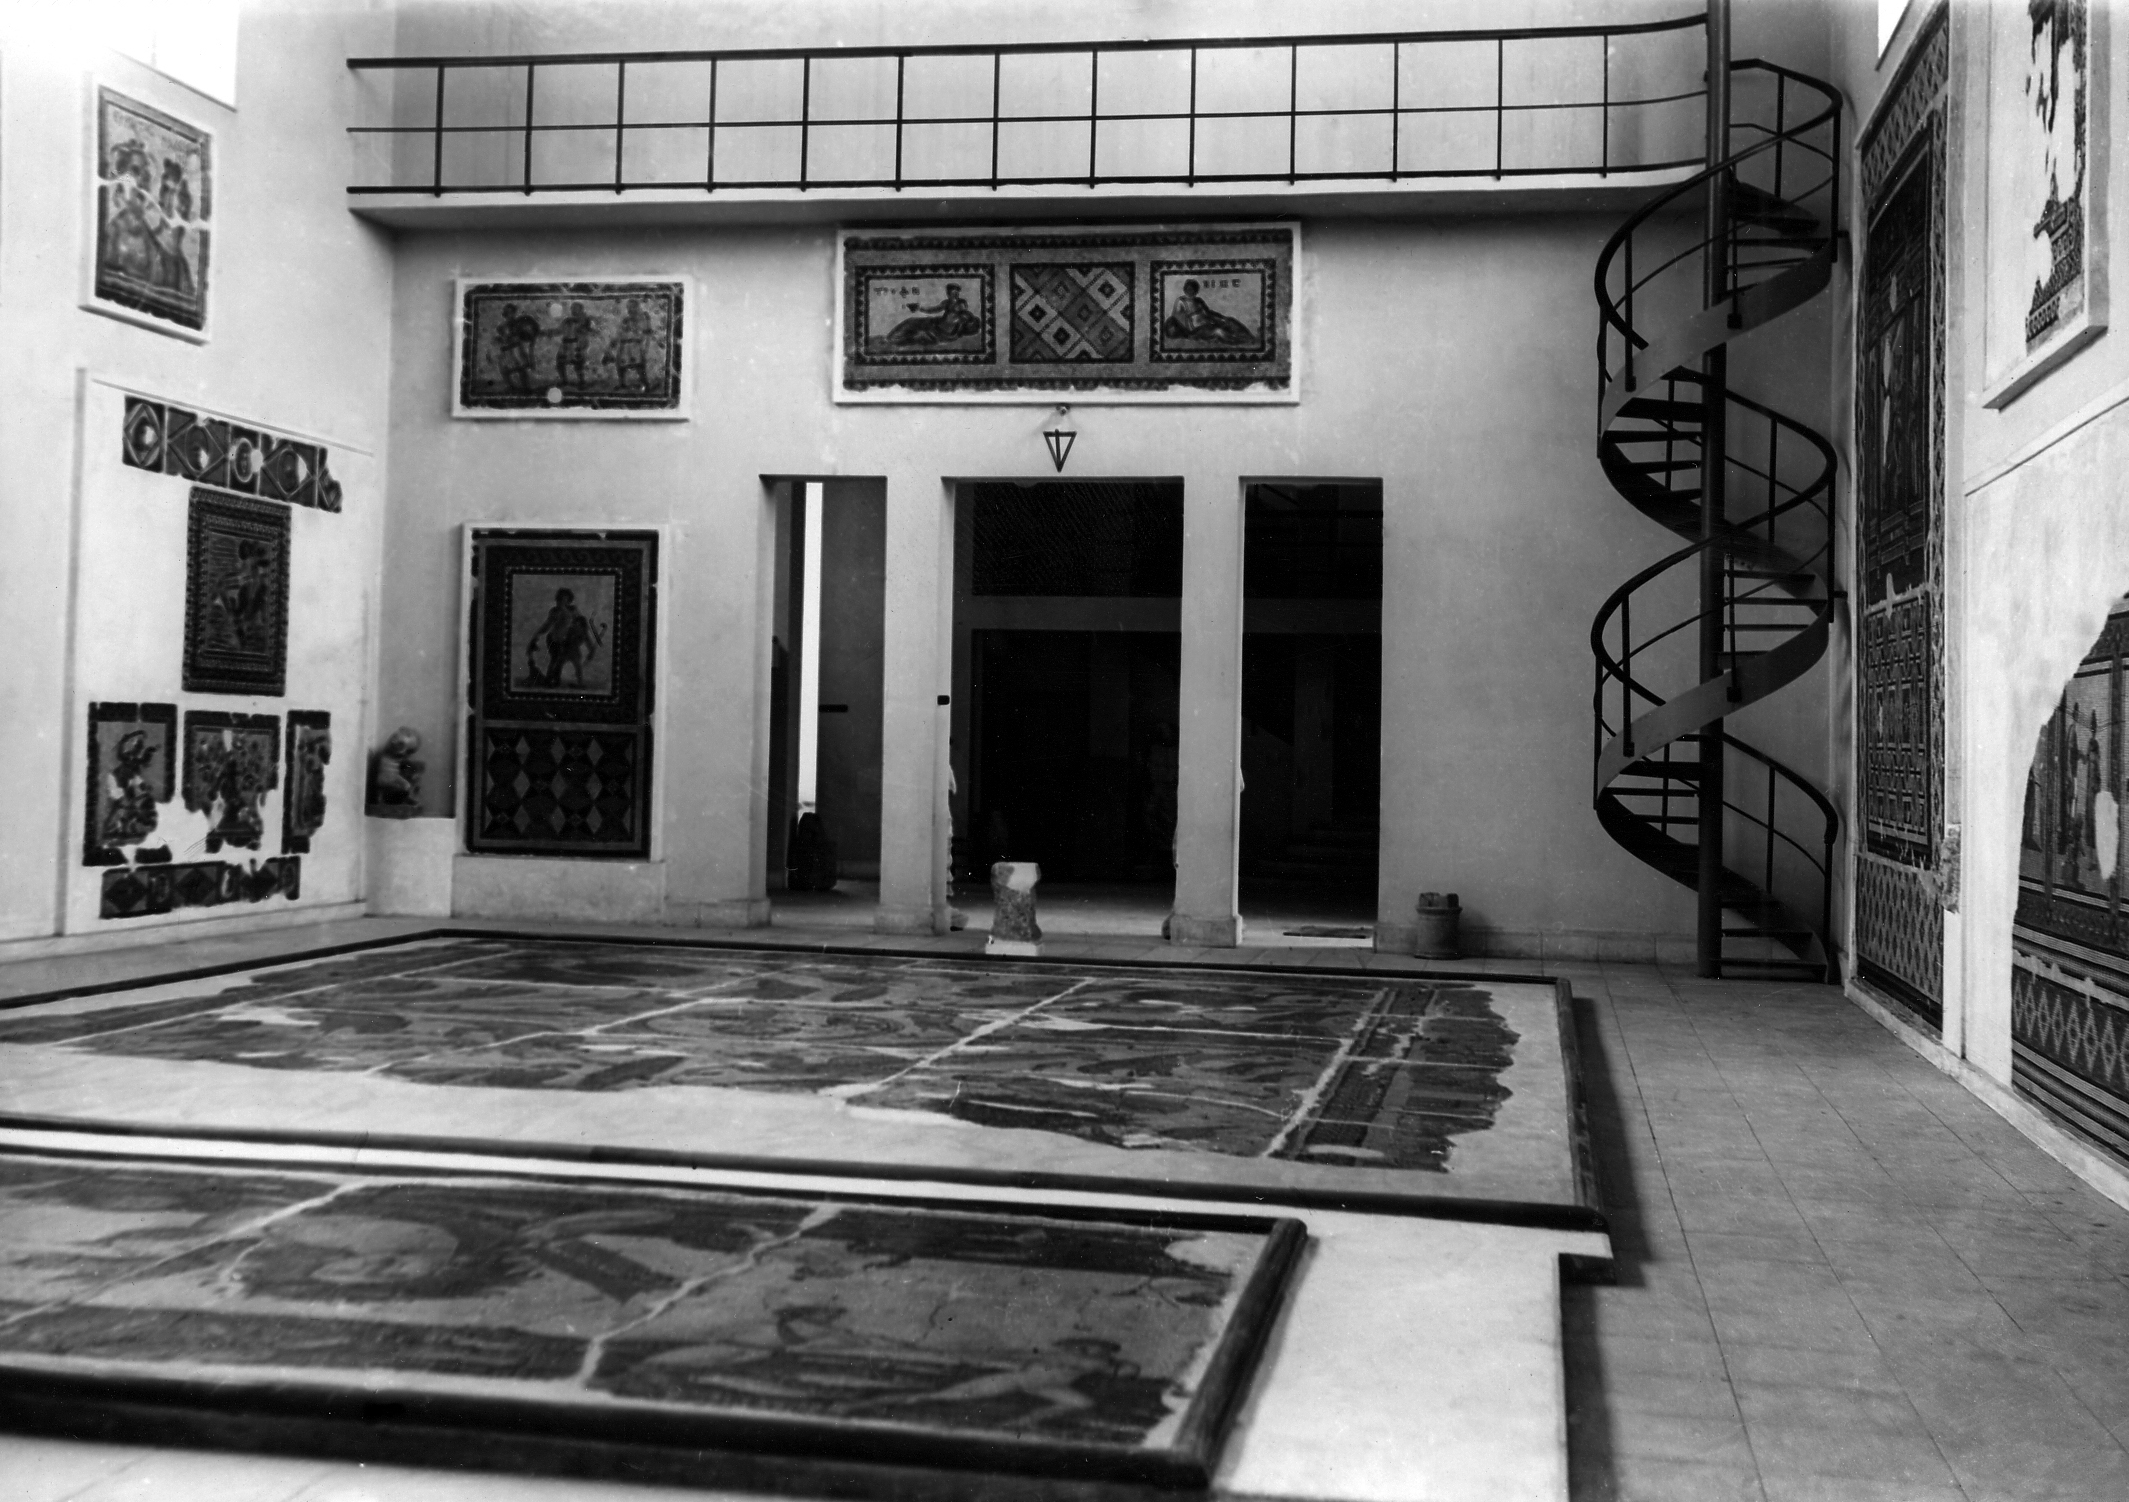 Antioch Museum, interior view, Exhibition Hall on the ground floor